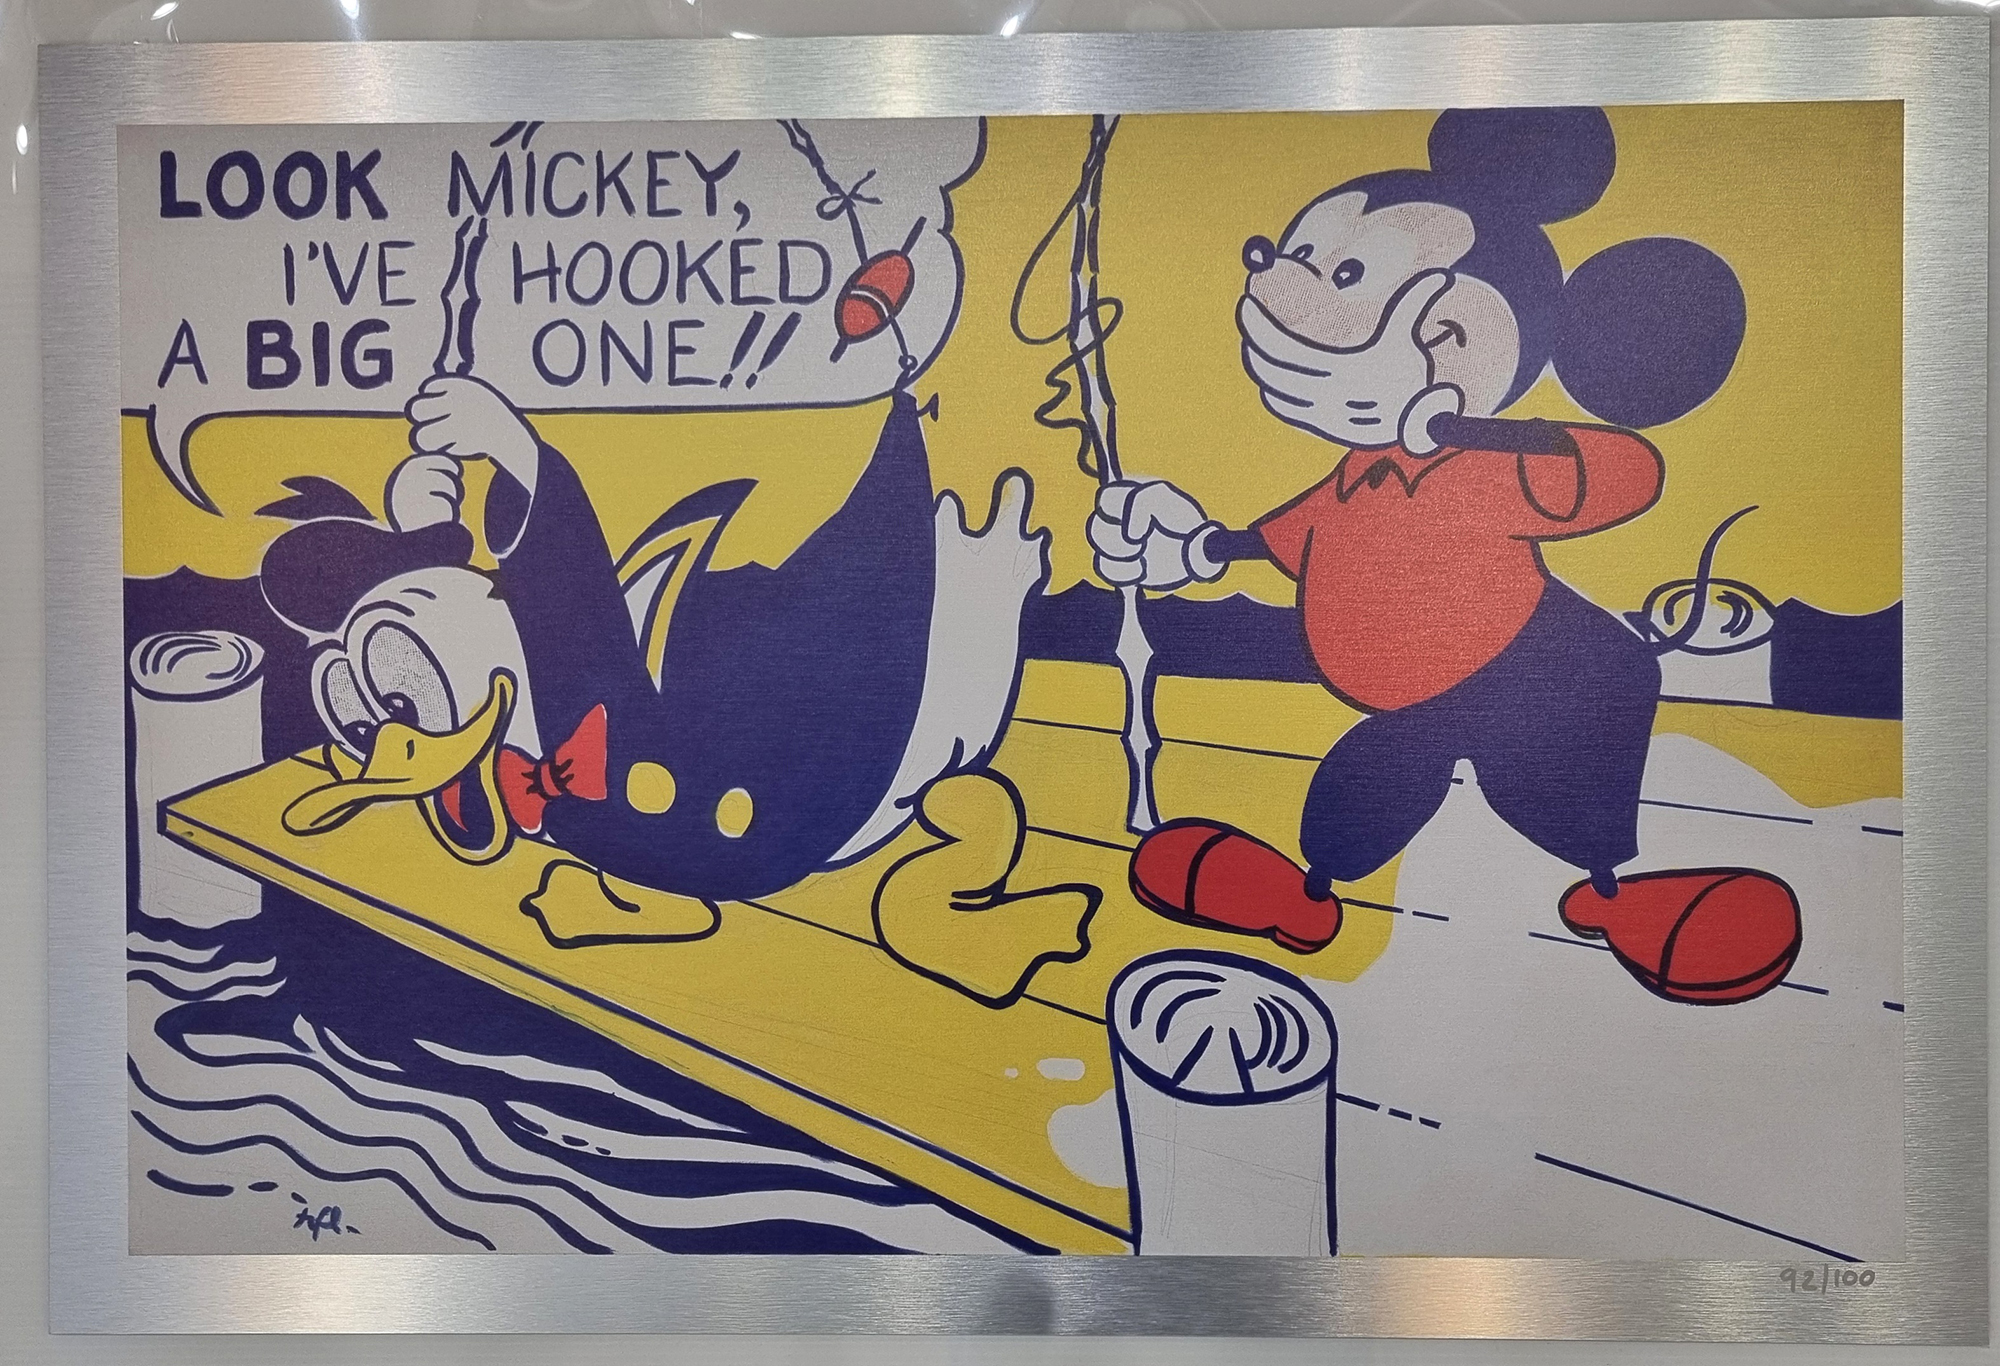 Rare Roy Lichtenstein "Look Mickey, 1961" Limited Edition on Metal. - Image 2 of 6